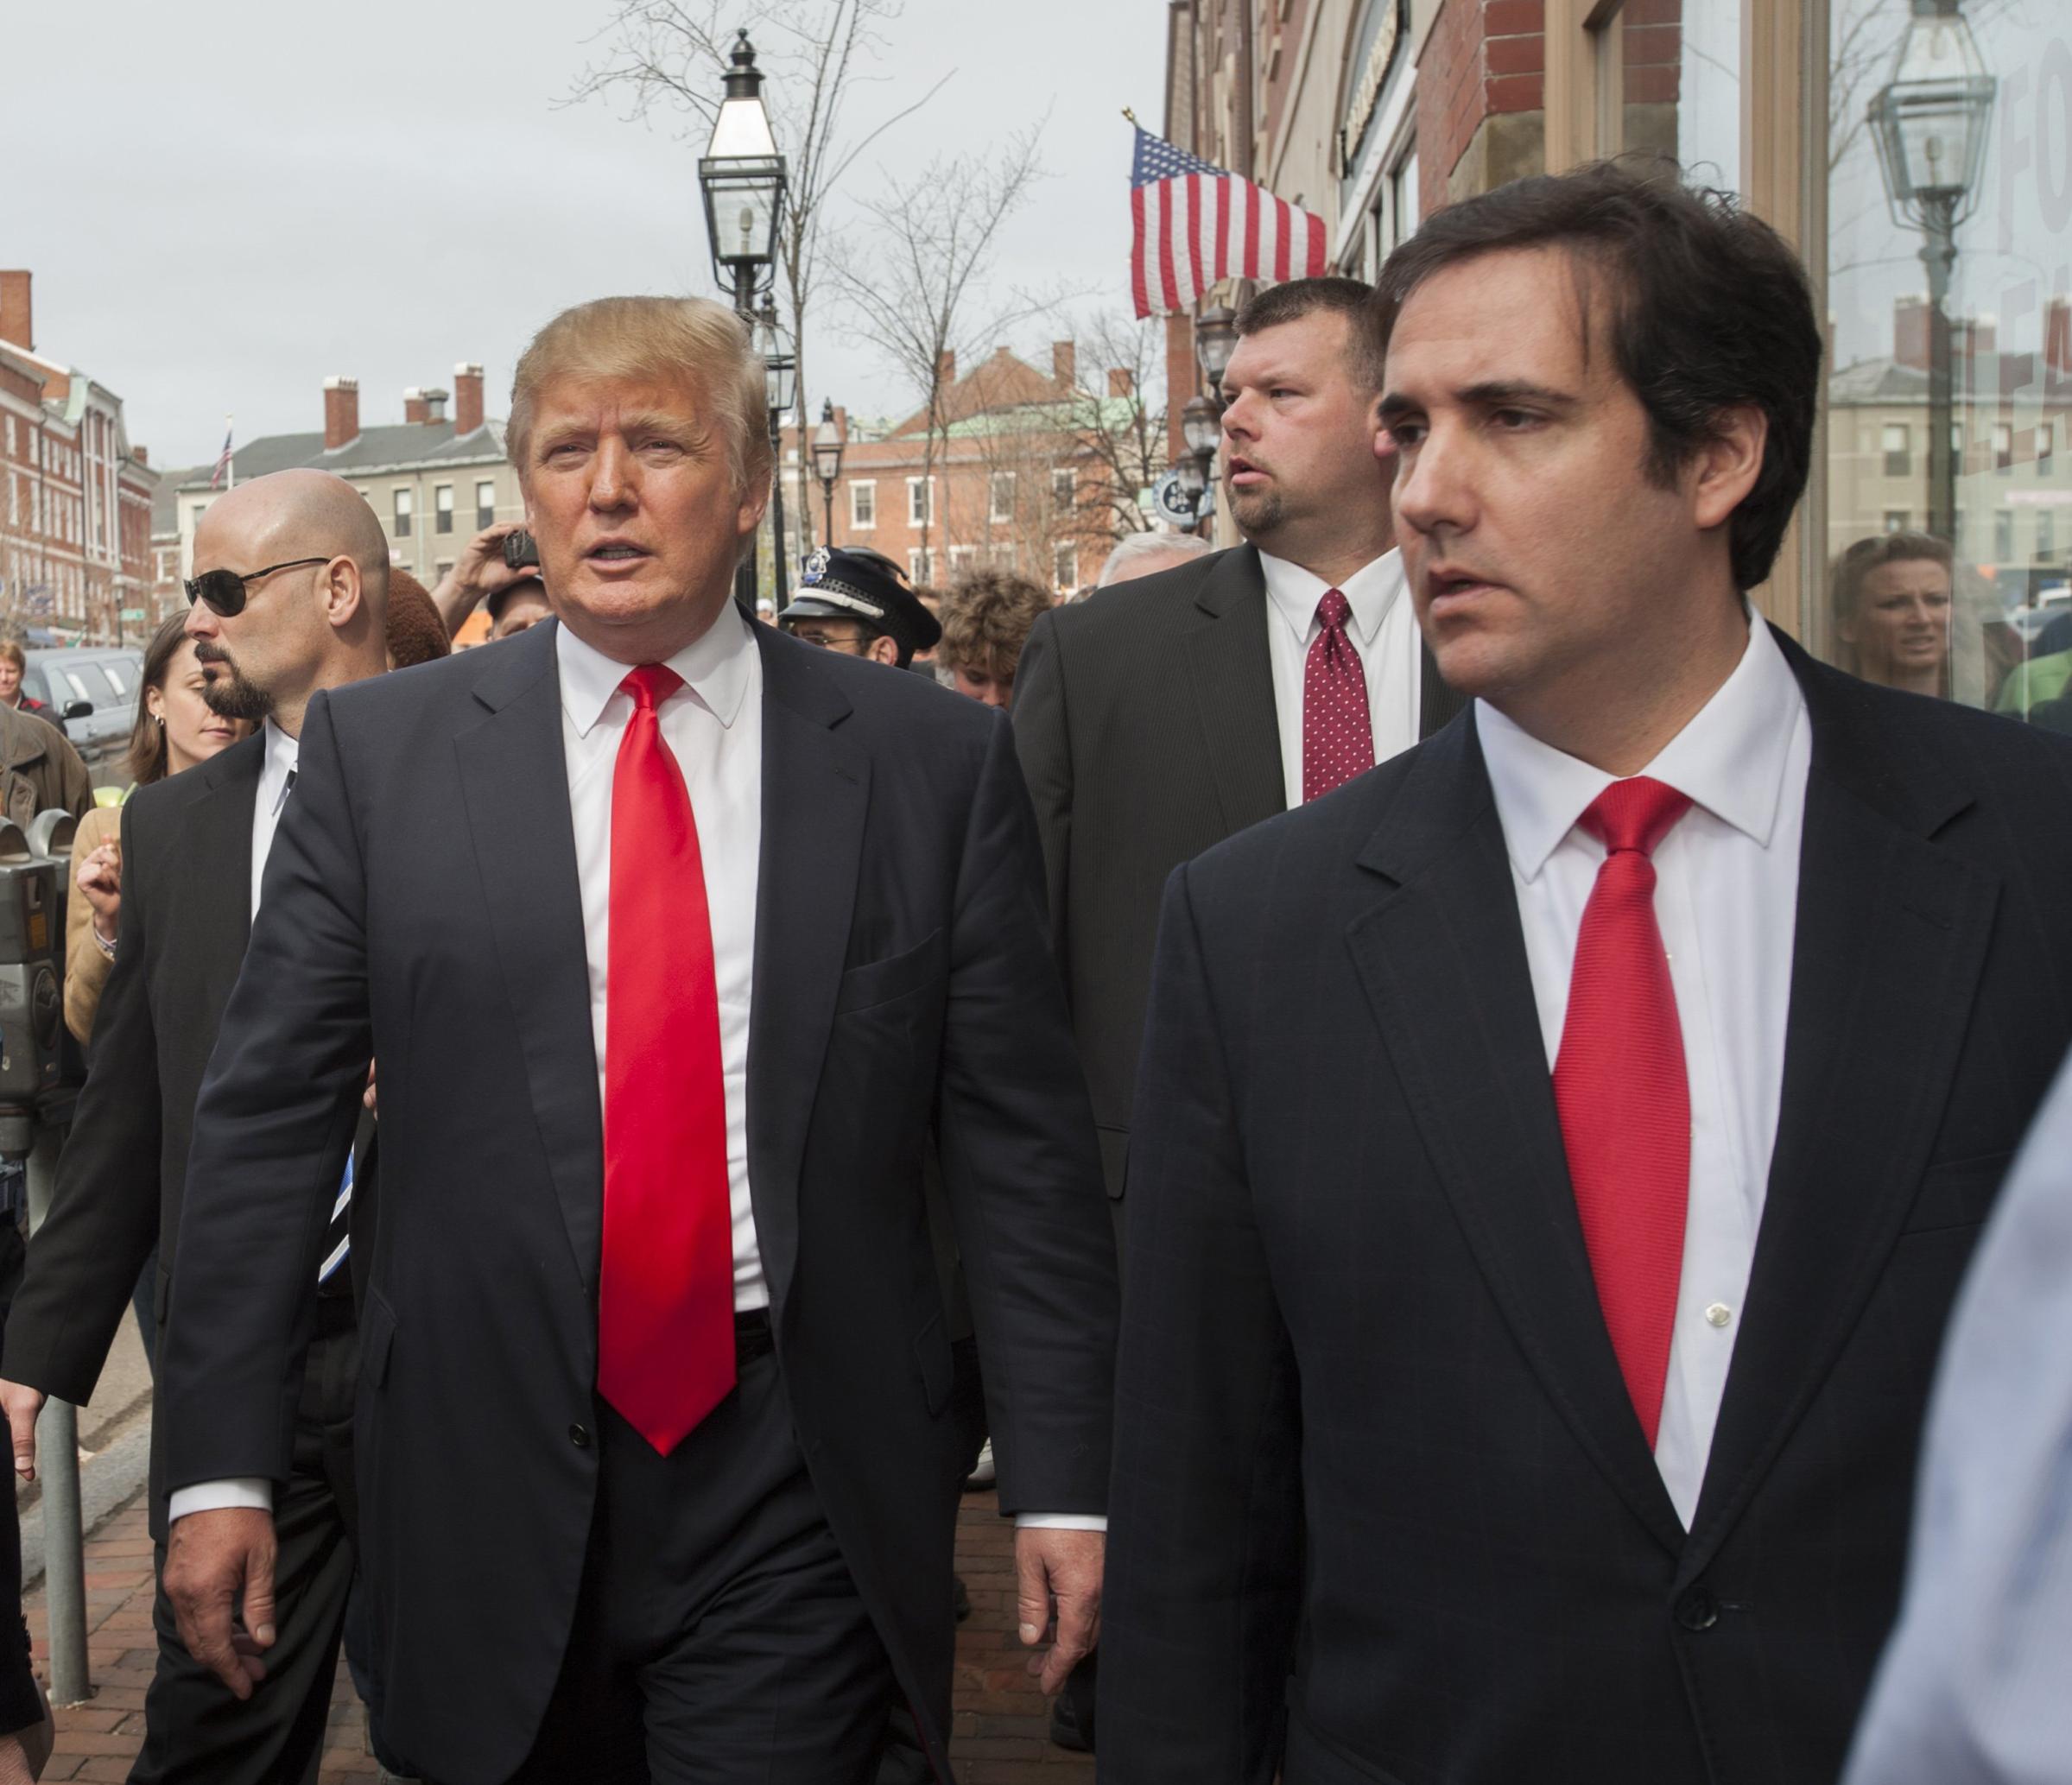 Trump and Cohen visit Portsmouth, N.H., in April 2011